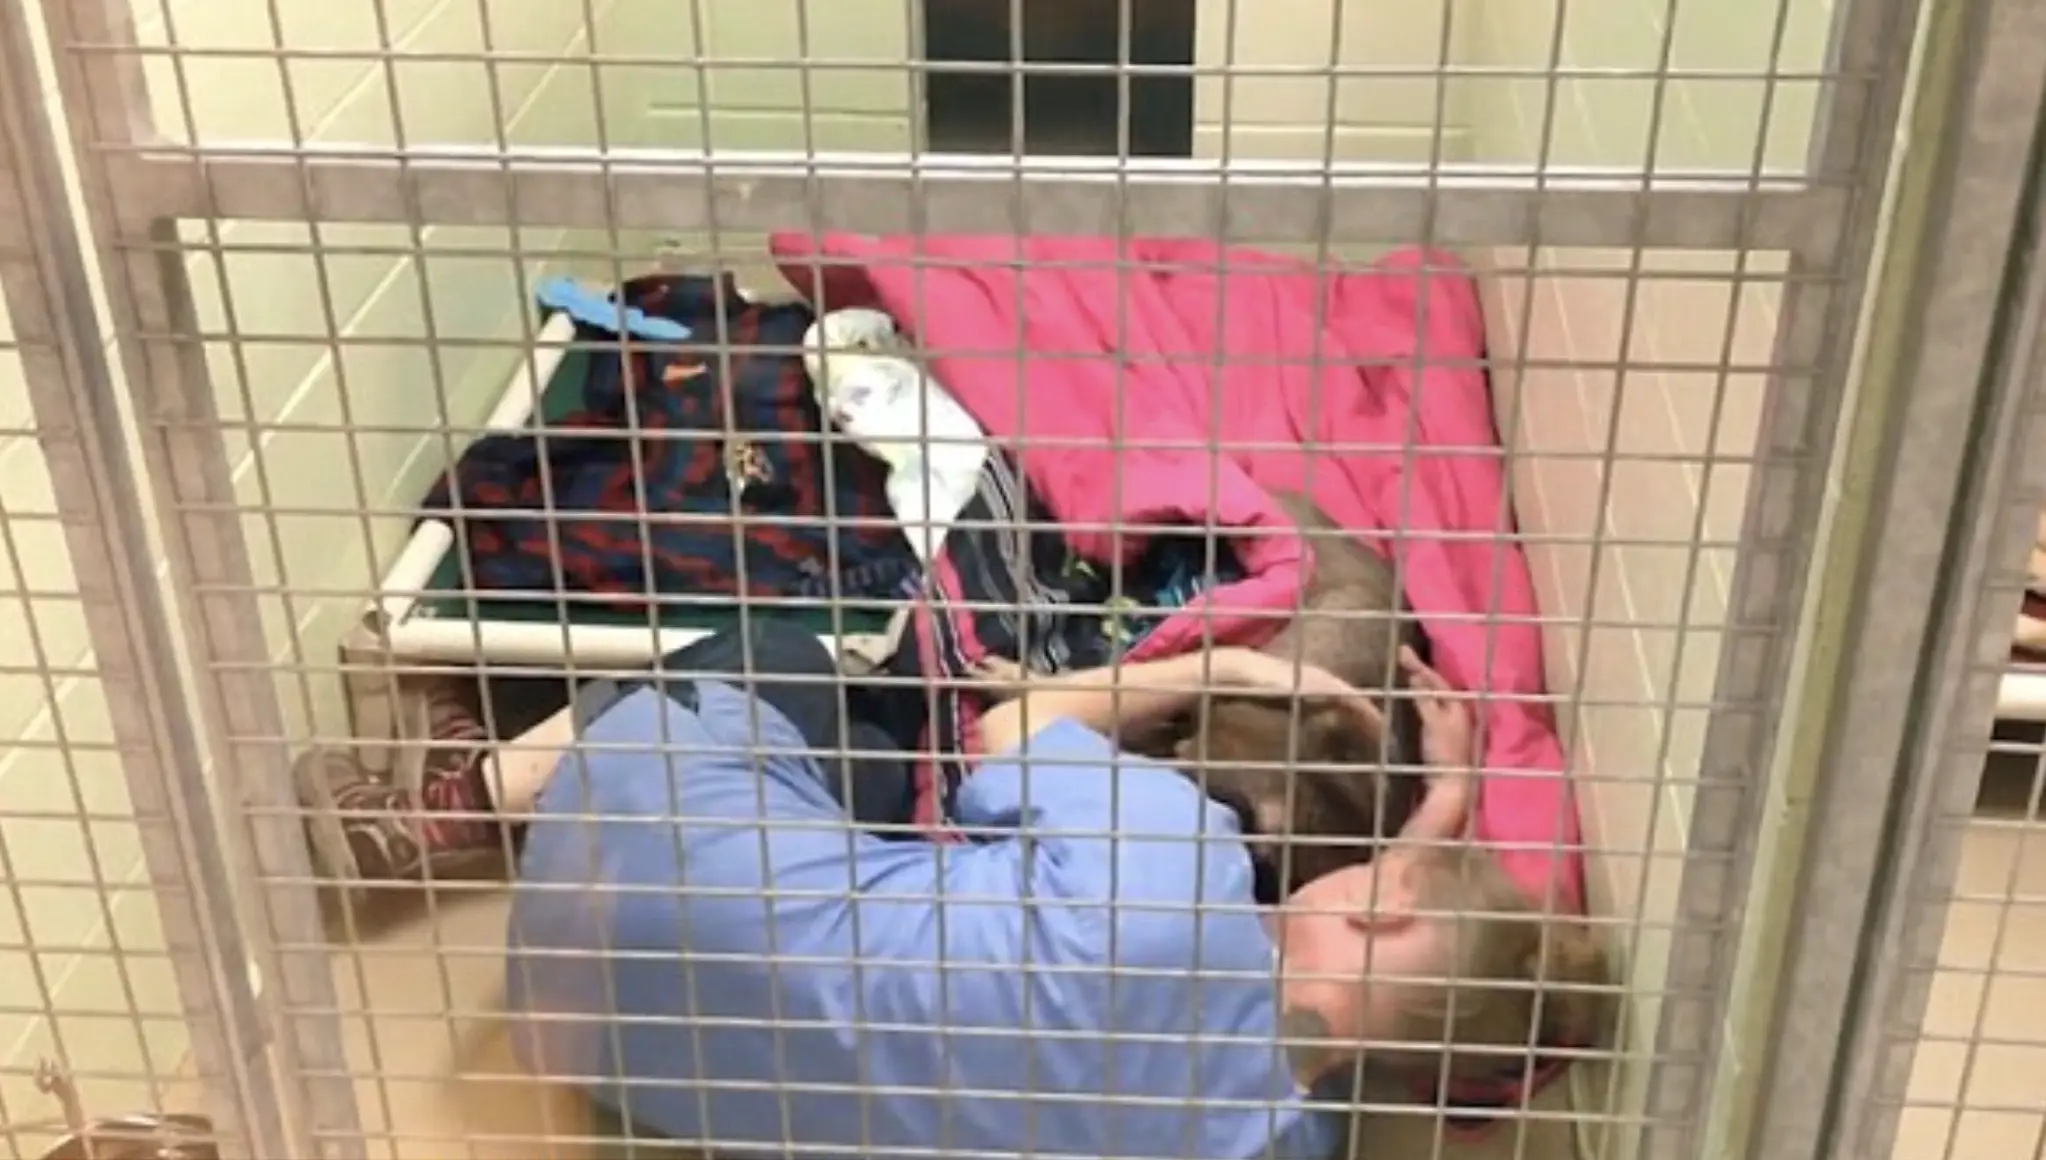 A Good Samaritan rescued the dogs and took them to the shelter just in time.